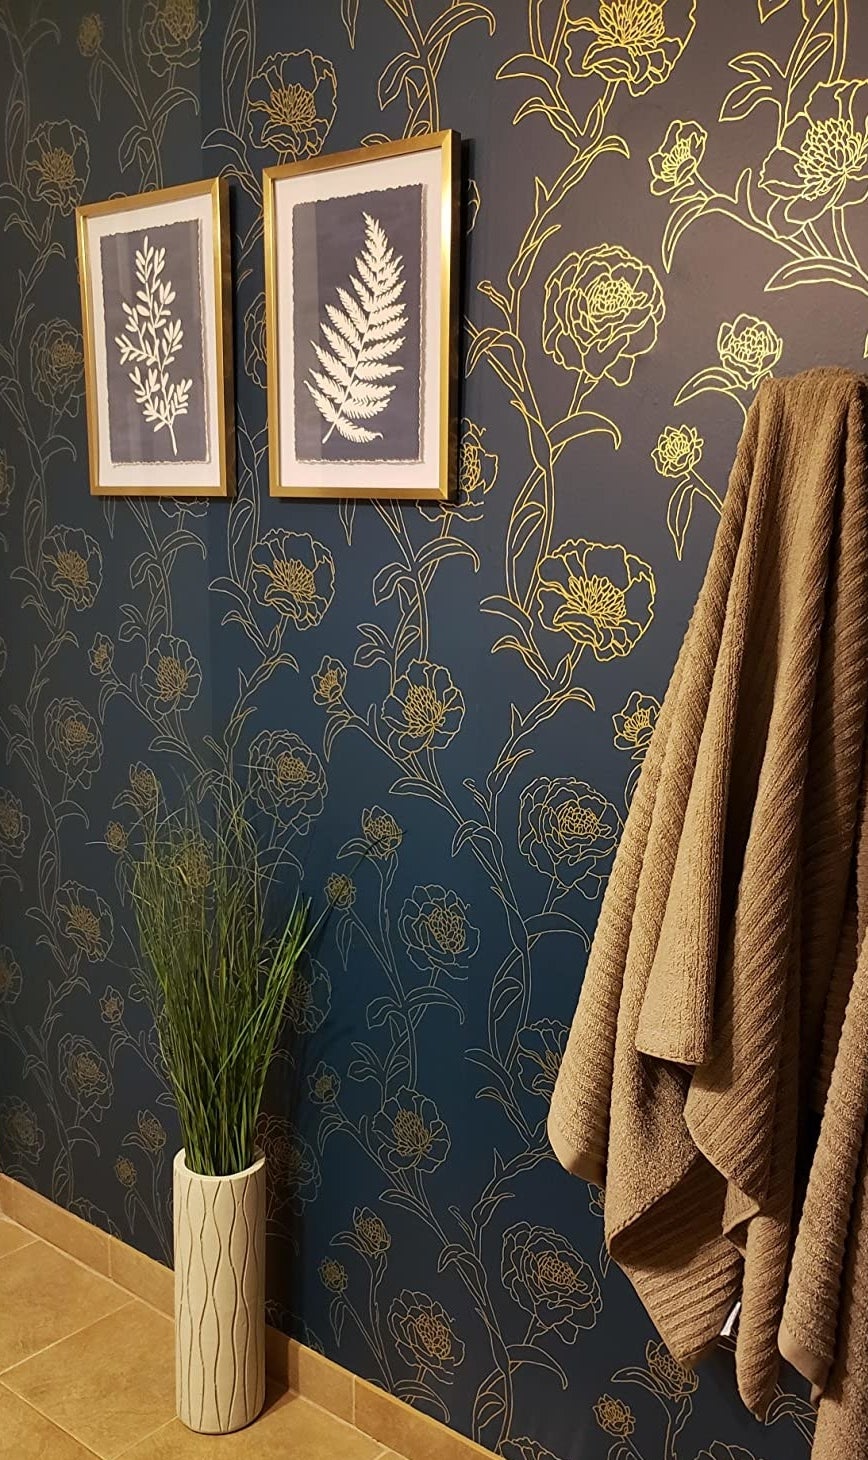 Reviewer image of navy blue and gold metallic floral wallpaper in bathroom